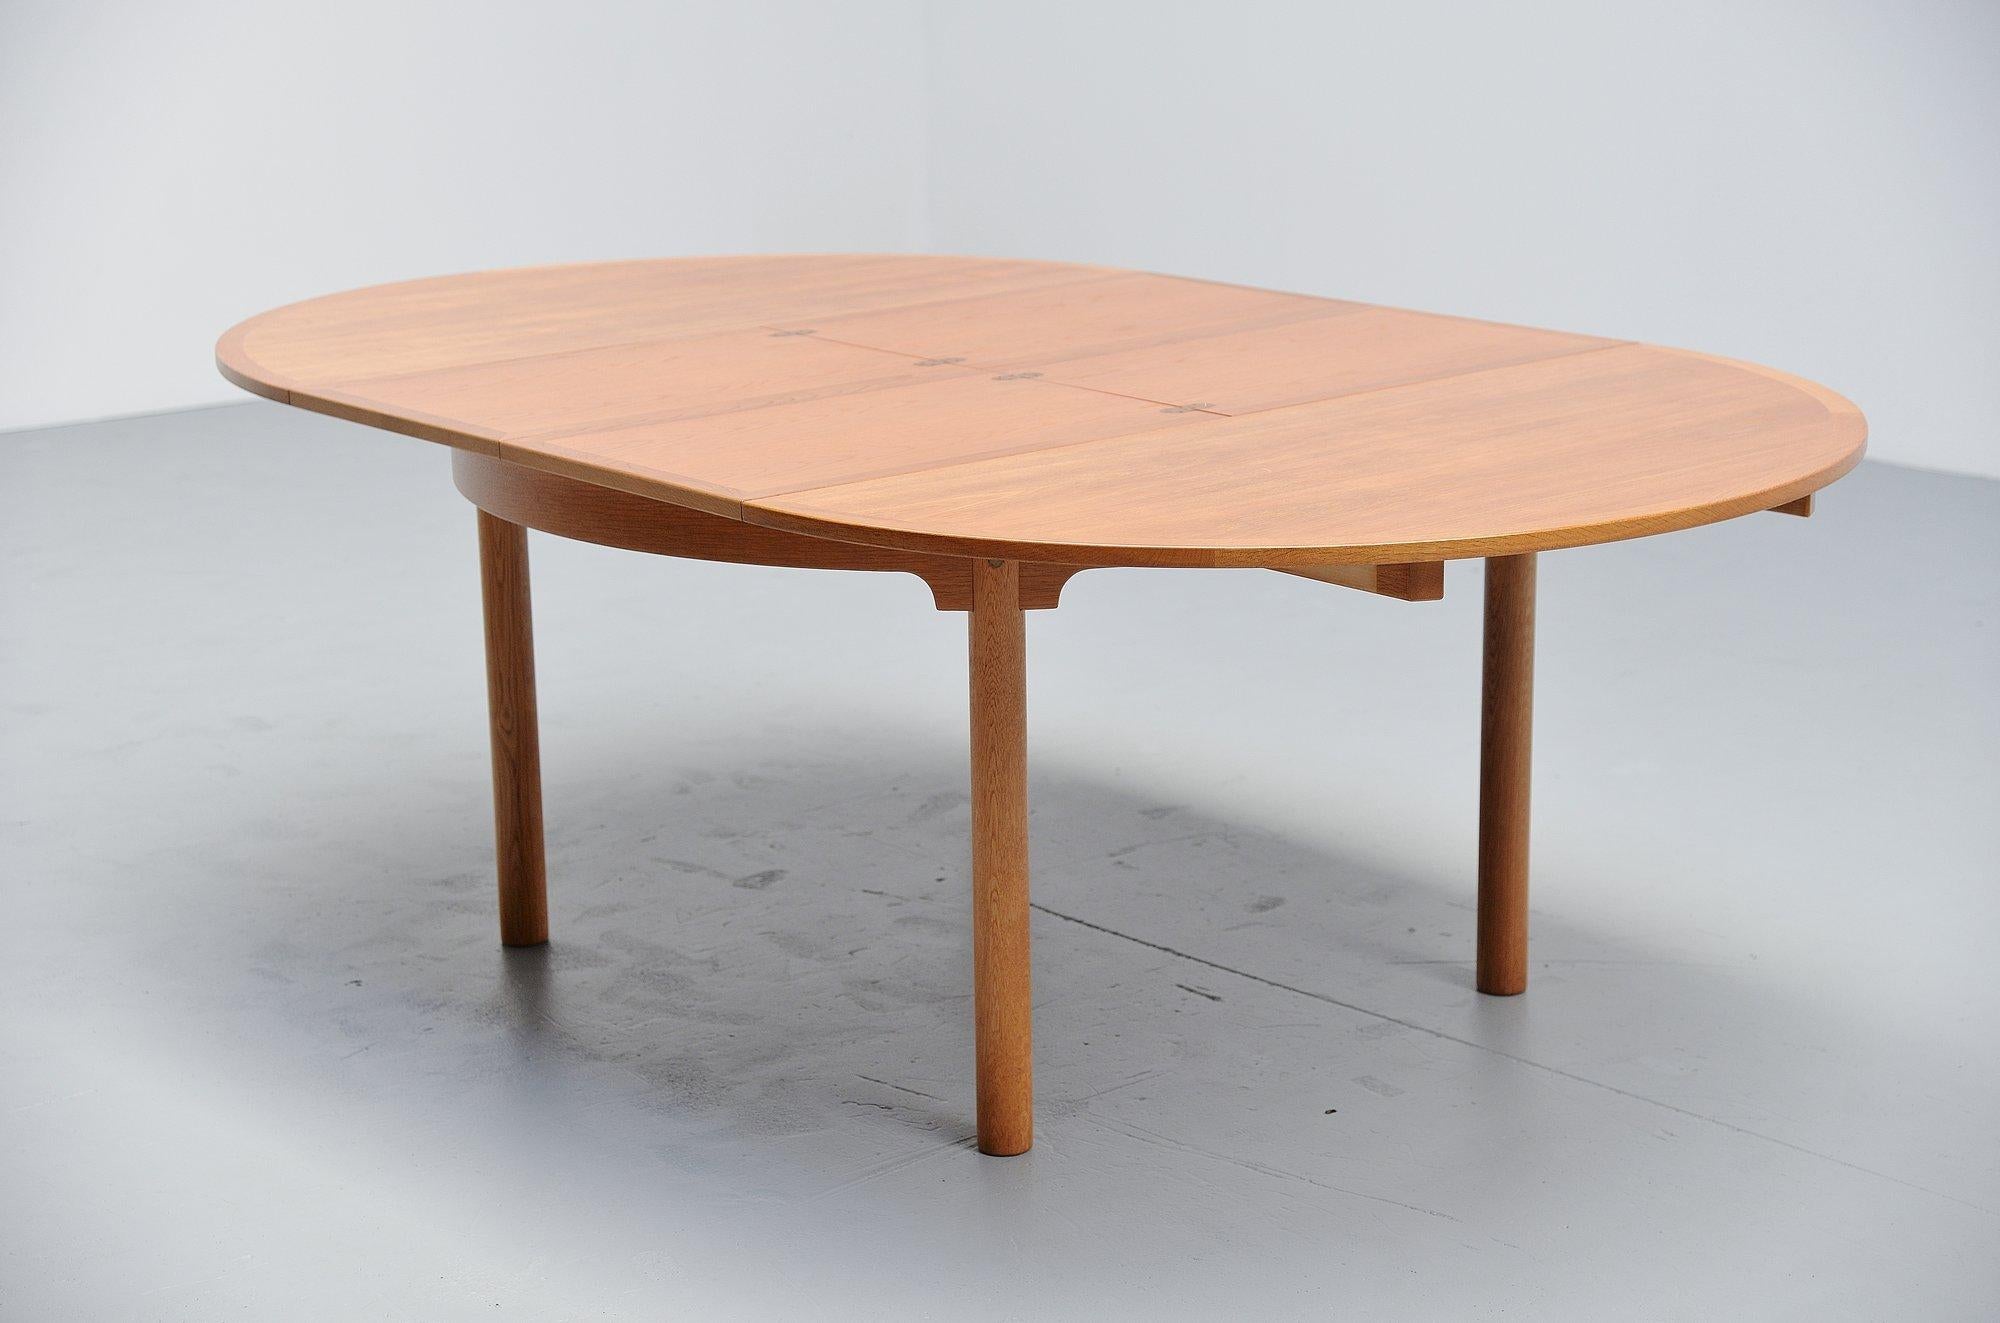 Nice and large extendable dining table model 140 designed by Borge Mogensen and manufactured by Karl Andersson, Denmark 1955. The table is 130×130 cm round and extendable using 2 extension leaves up to a 216 cm long table. The table has nice brass